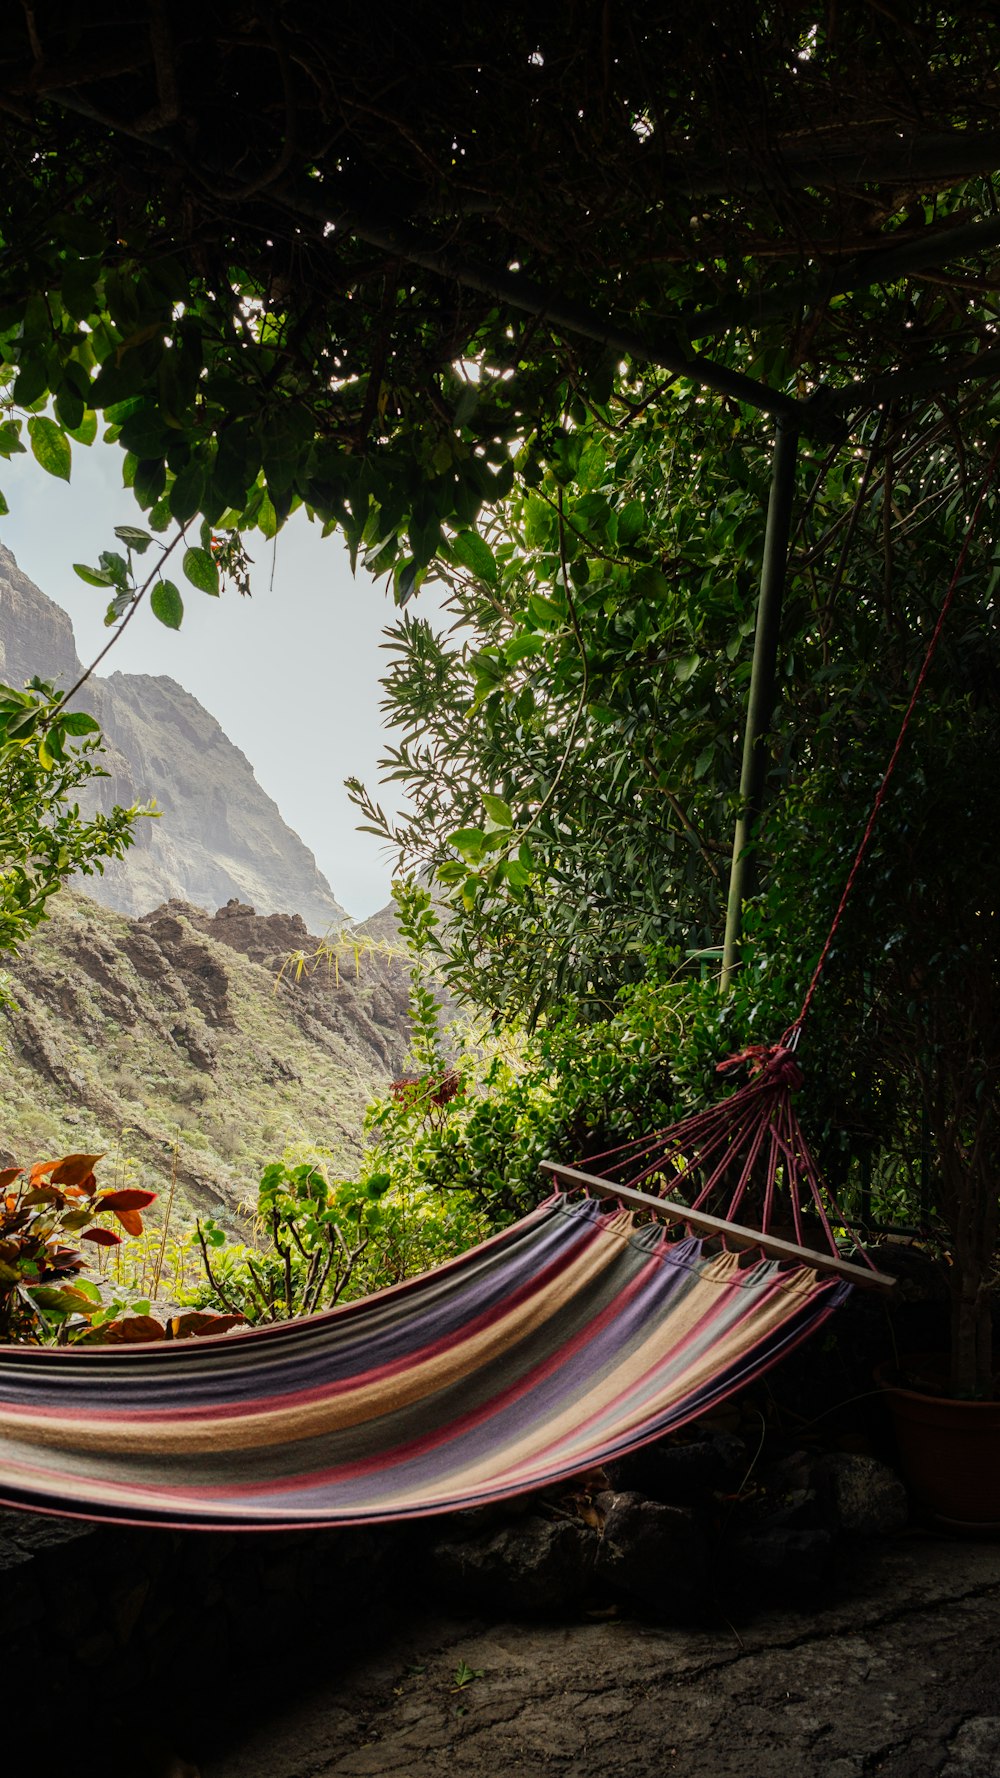 a hammock in the shade of a tree with mountains in the background